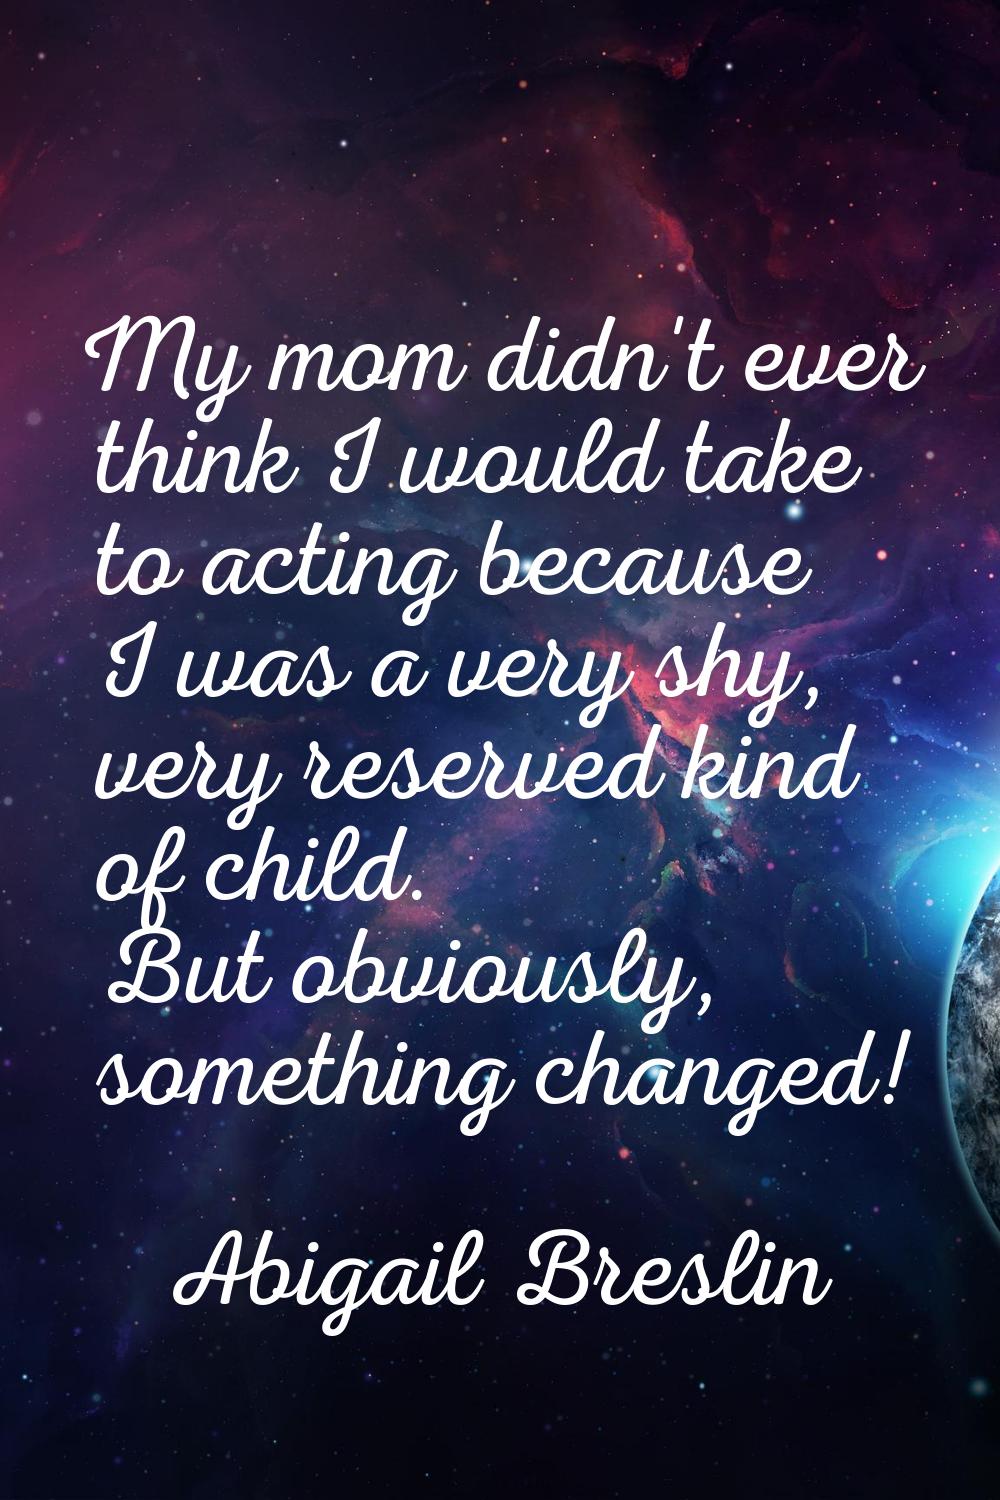 My mom didn't ever think I would take to acting because I was a very shy, very reserved kind of chi